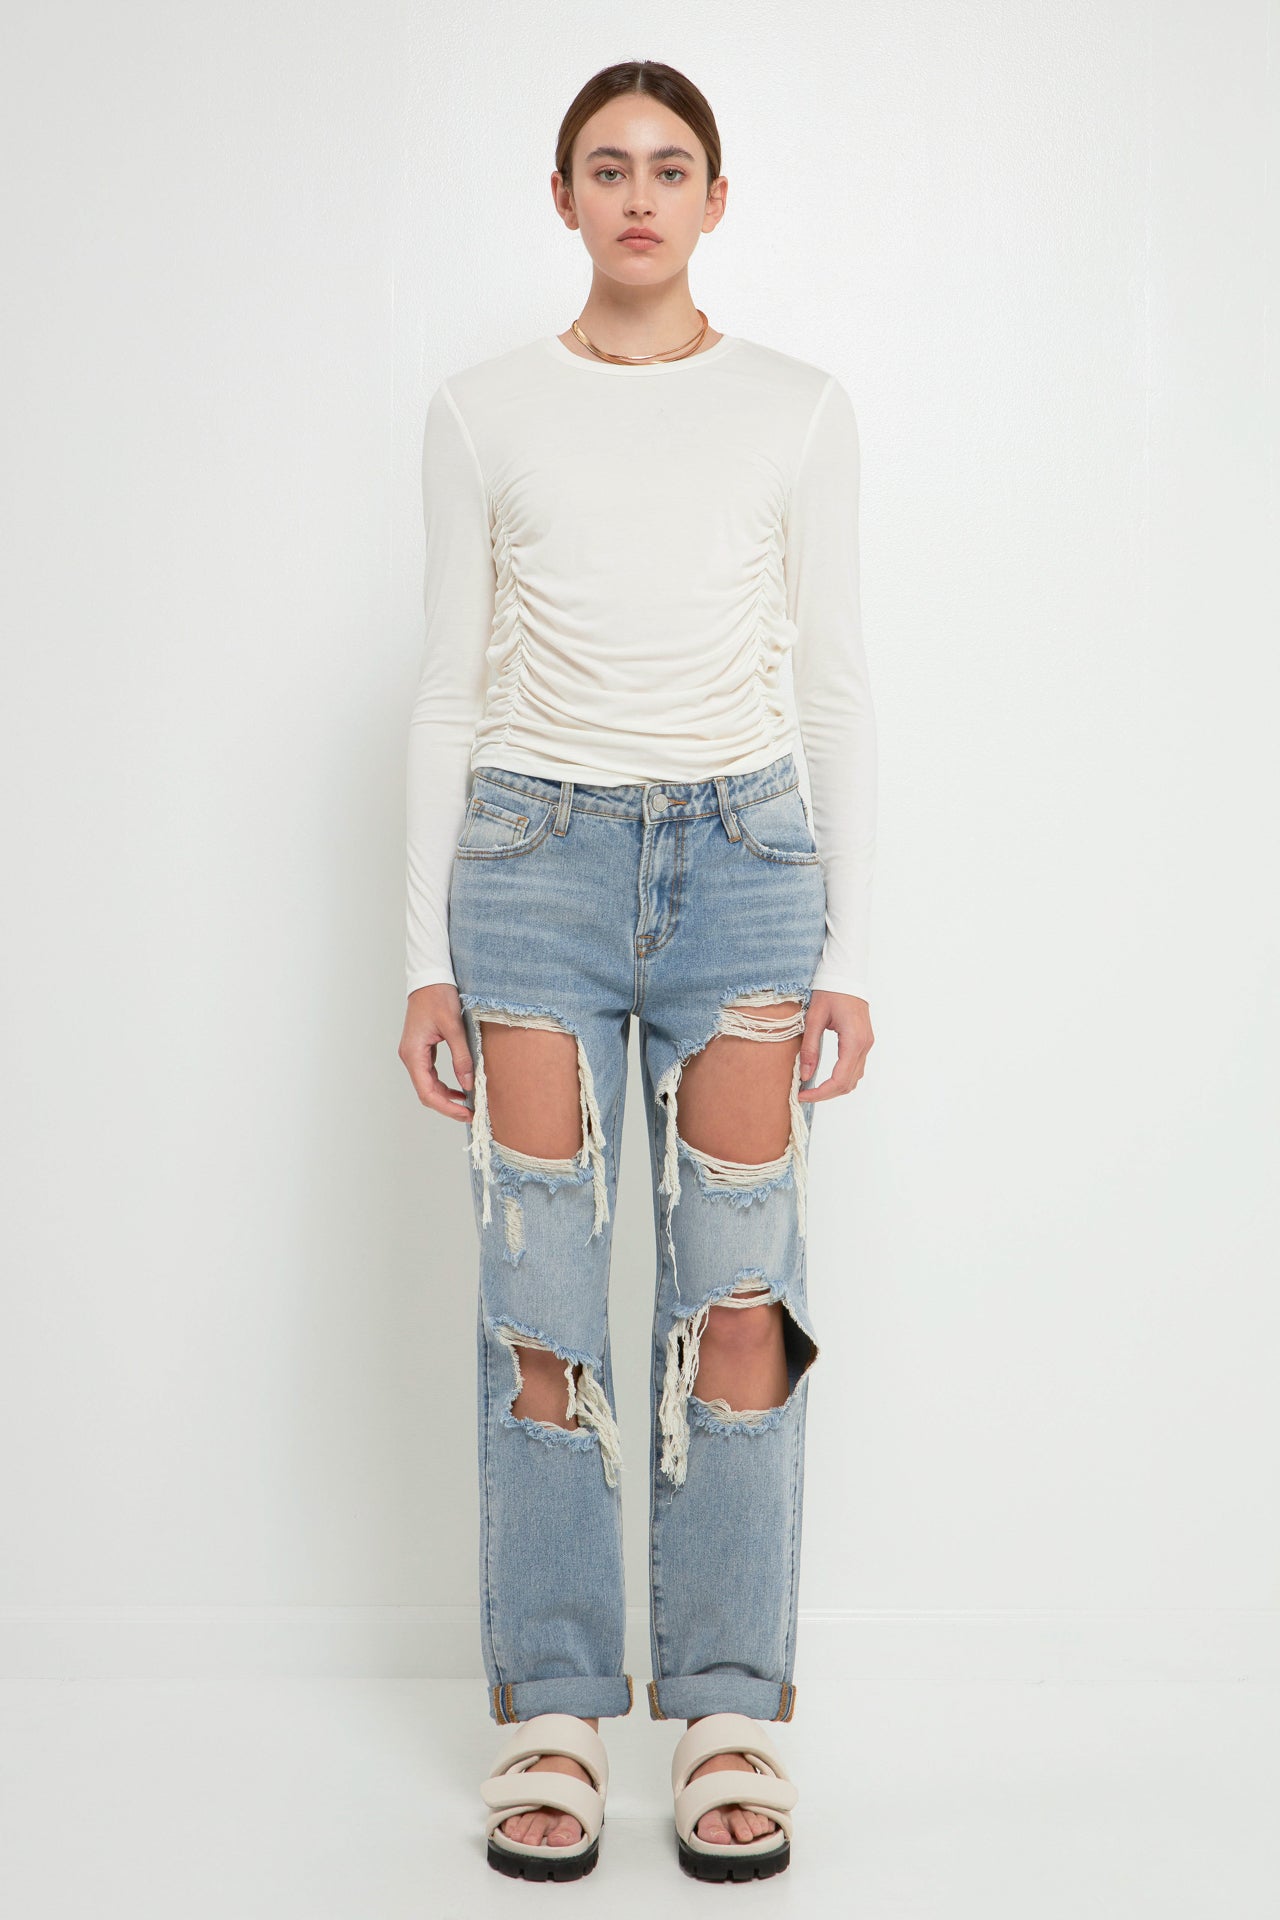 GREY LAB-Ruched Side Knit Top-TOPS available at Objectrare